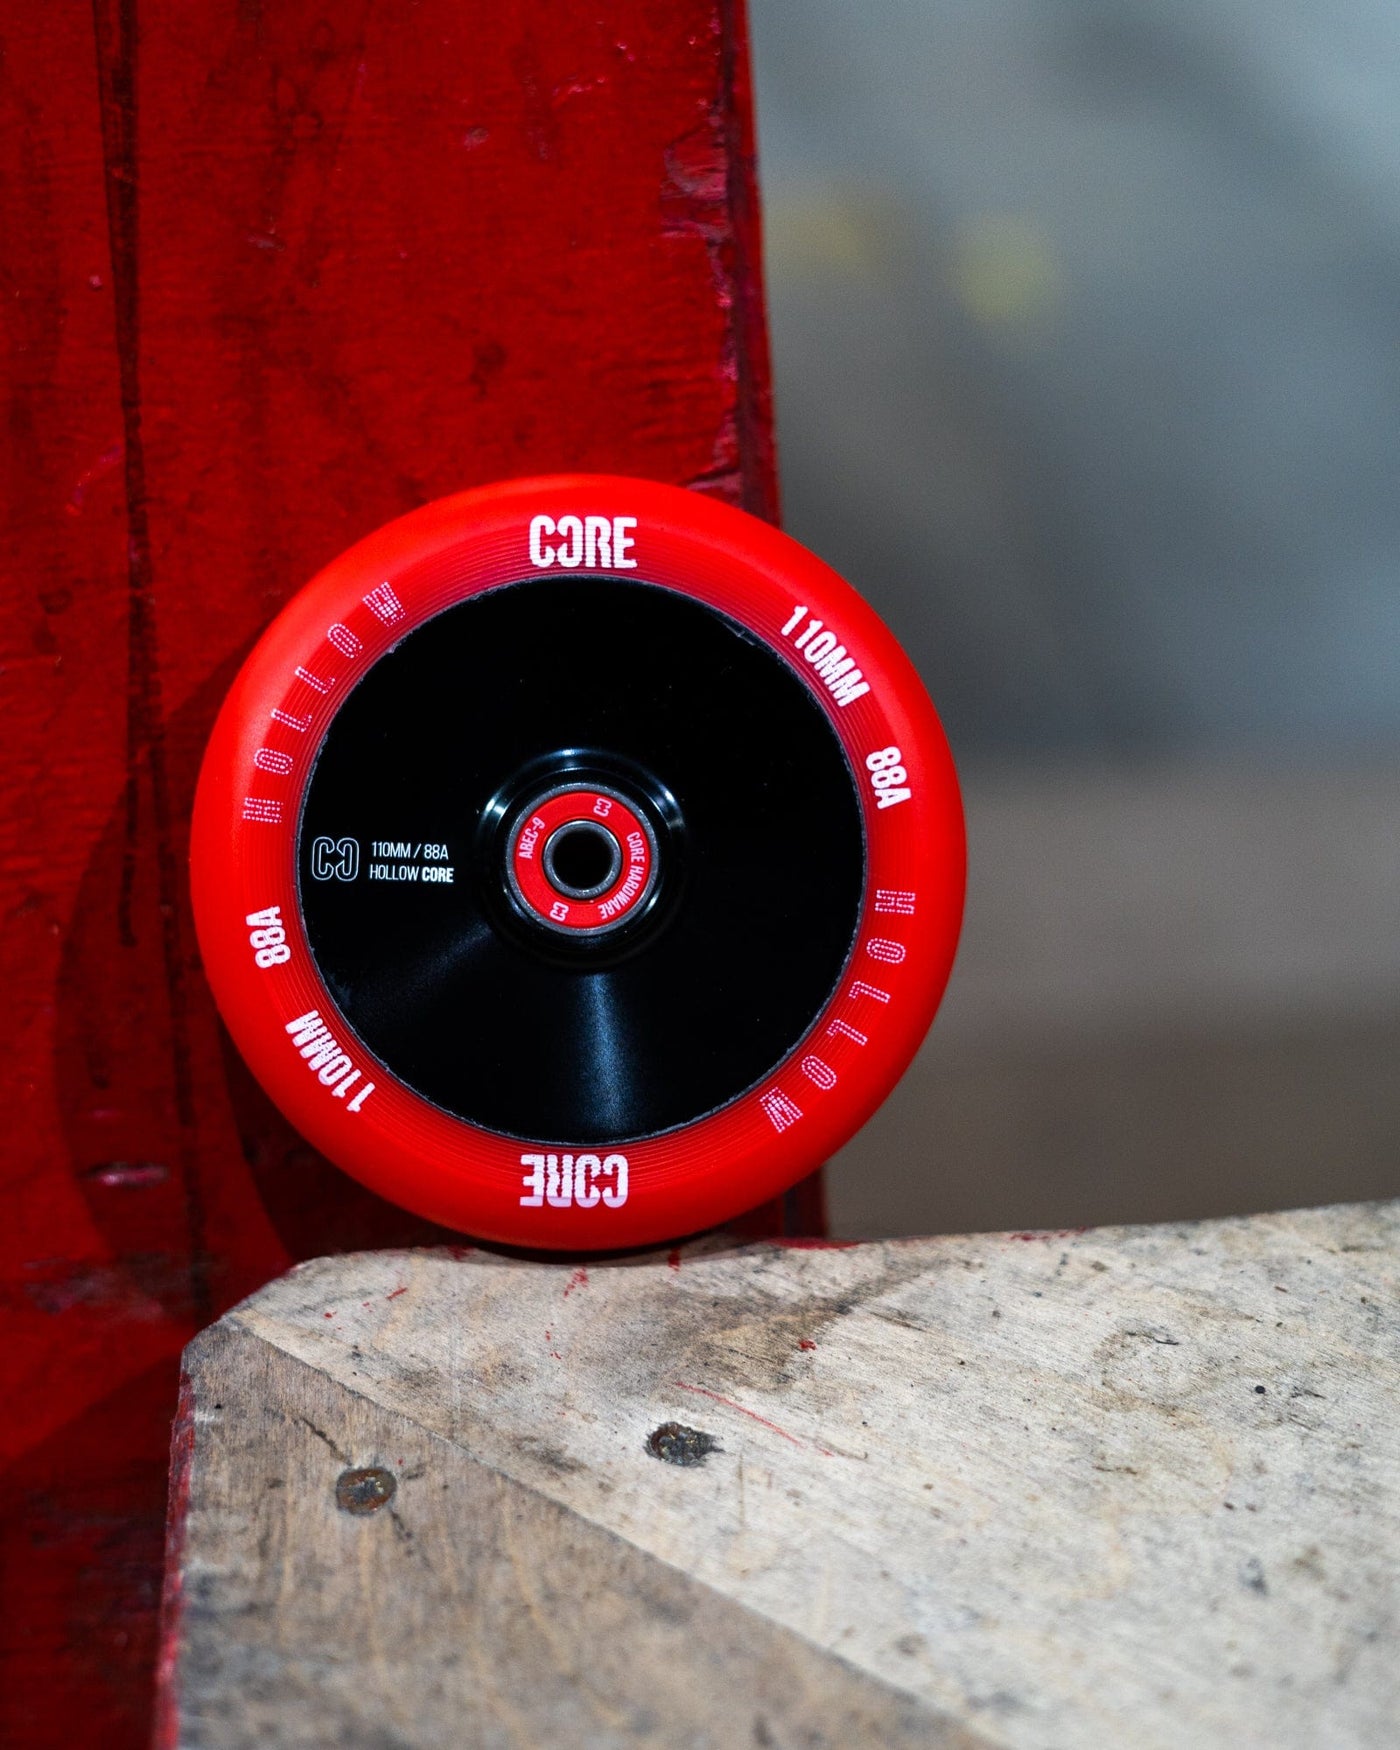 CORE Hex Hollow Stunt V2 Red-Black Wheel 110mm I Scooter Wheel Side Leaning